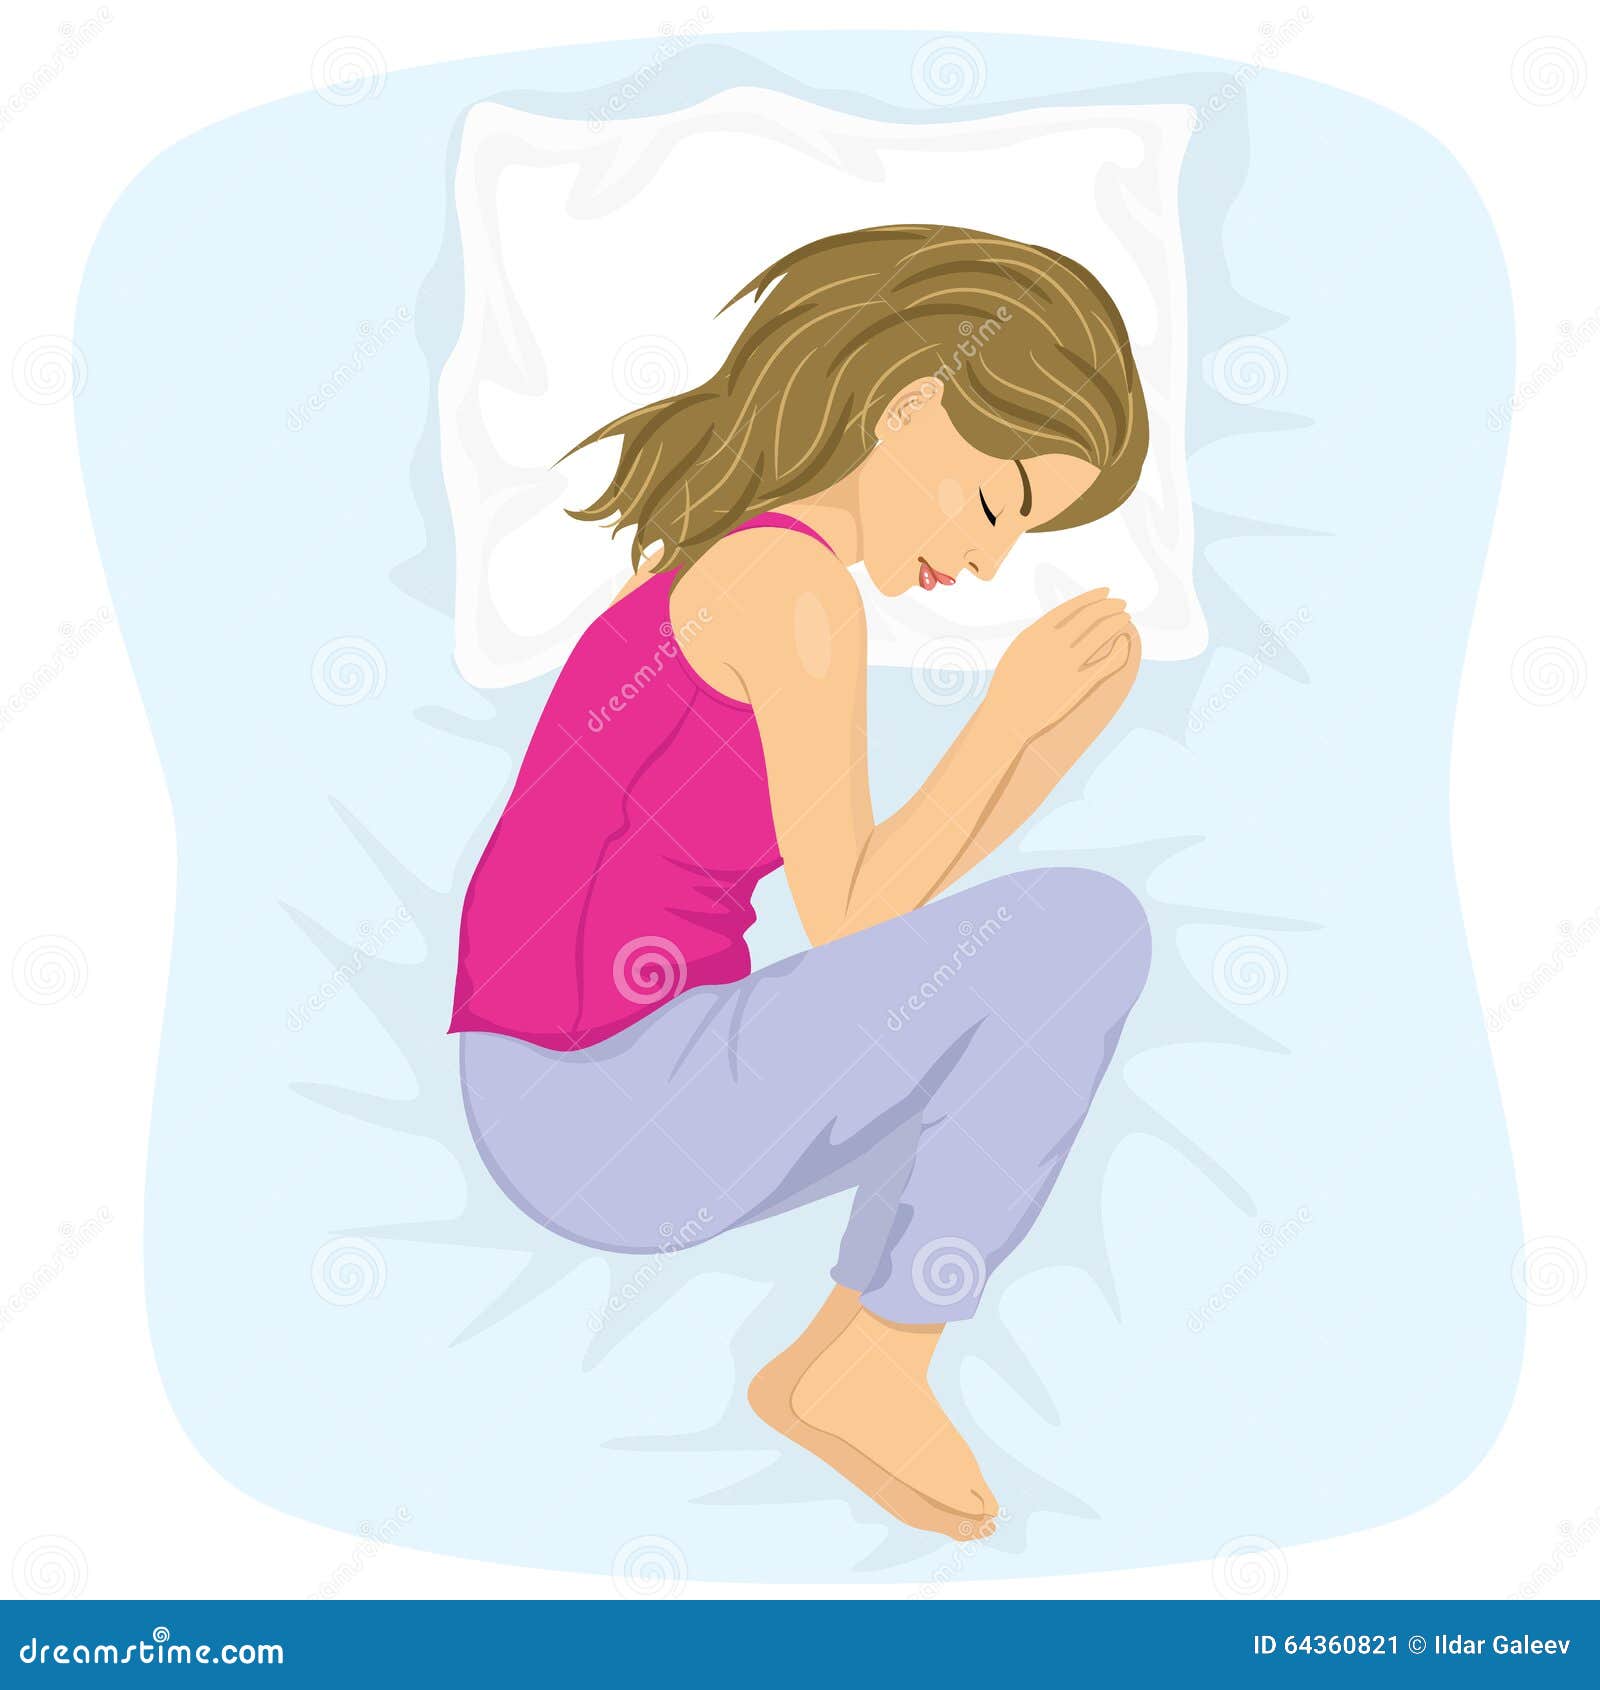 Woman Sleeping in the Fetal Position Stock Vector - Illustration of ...